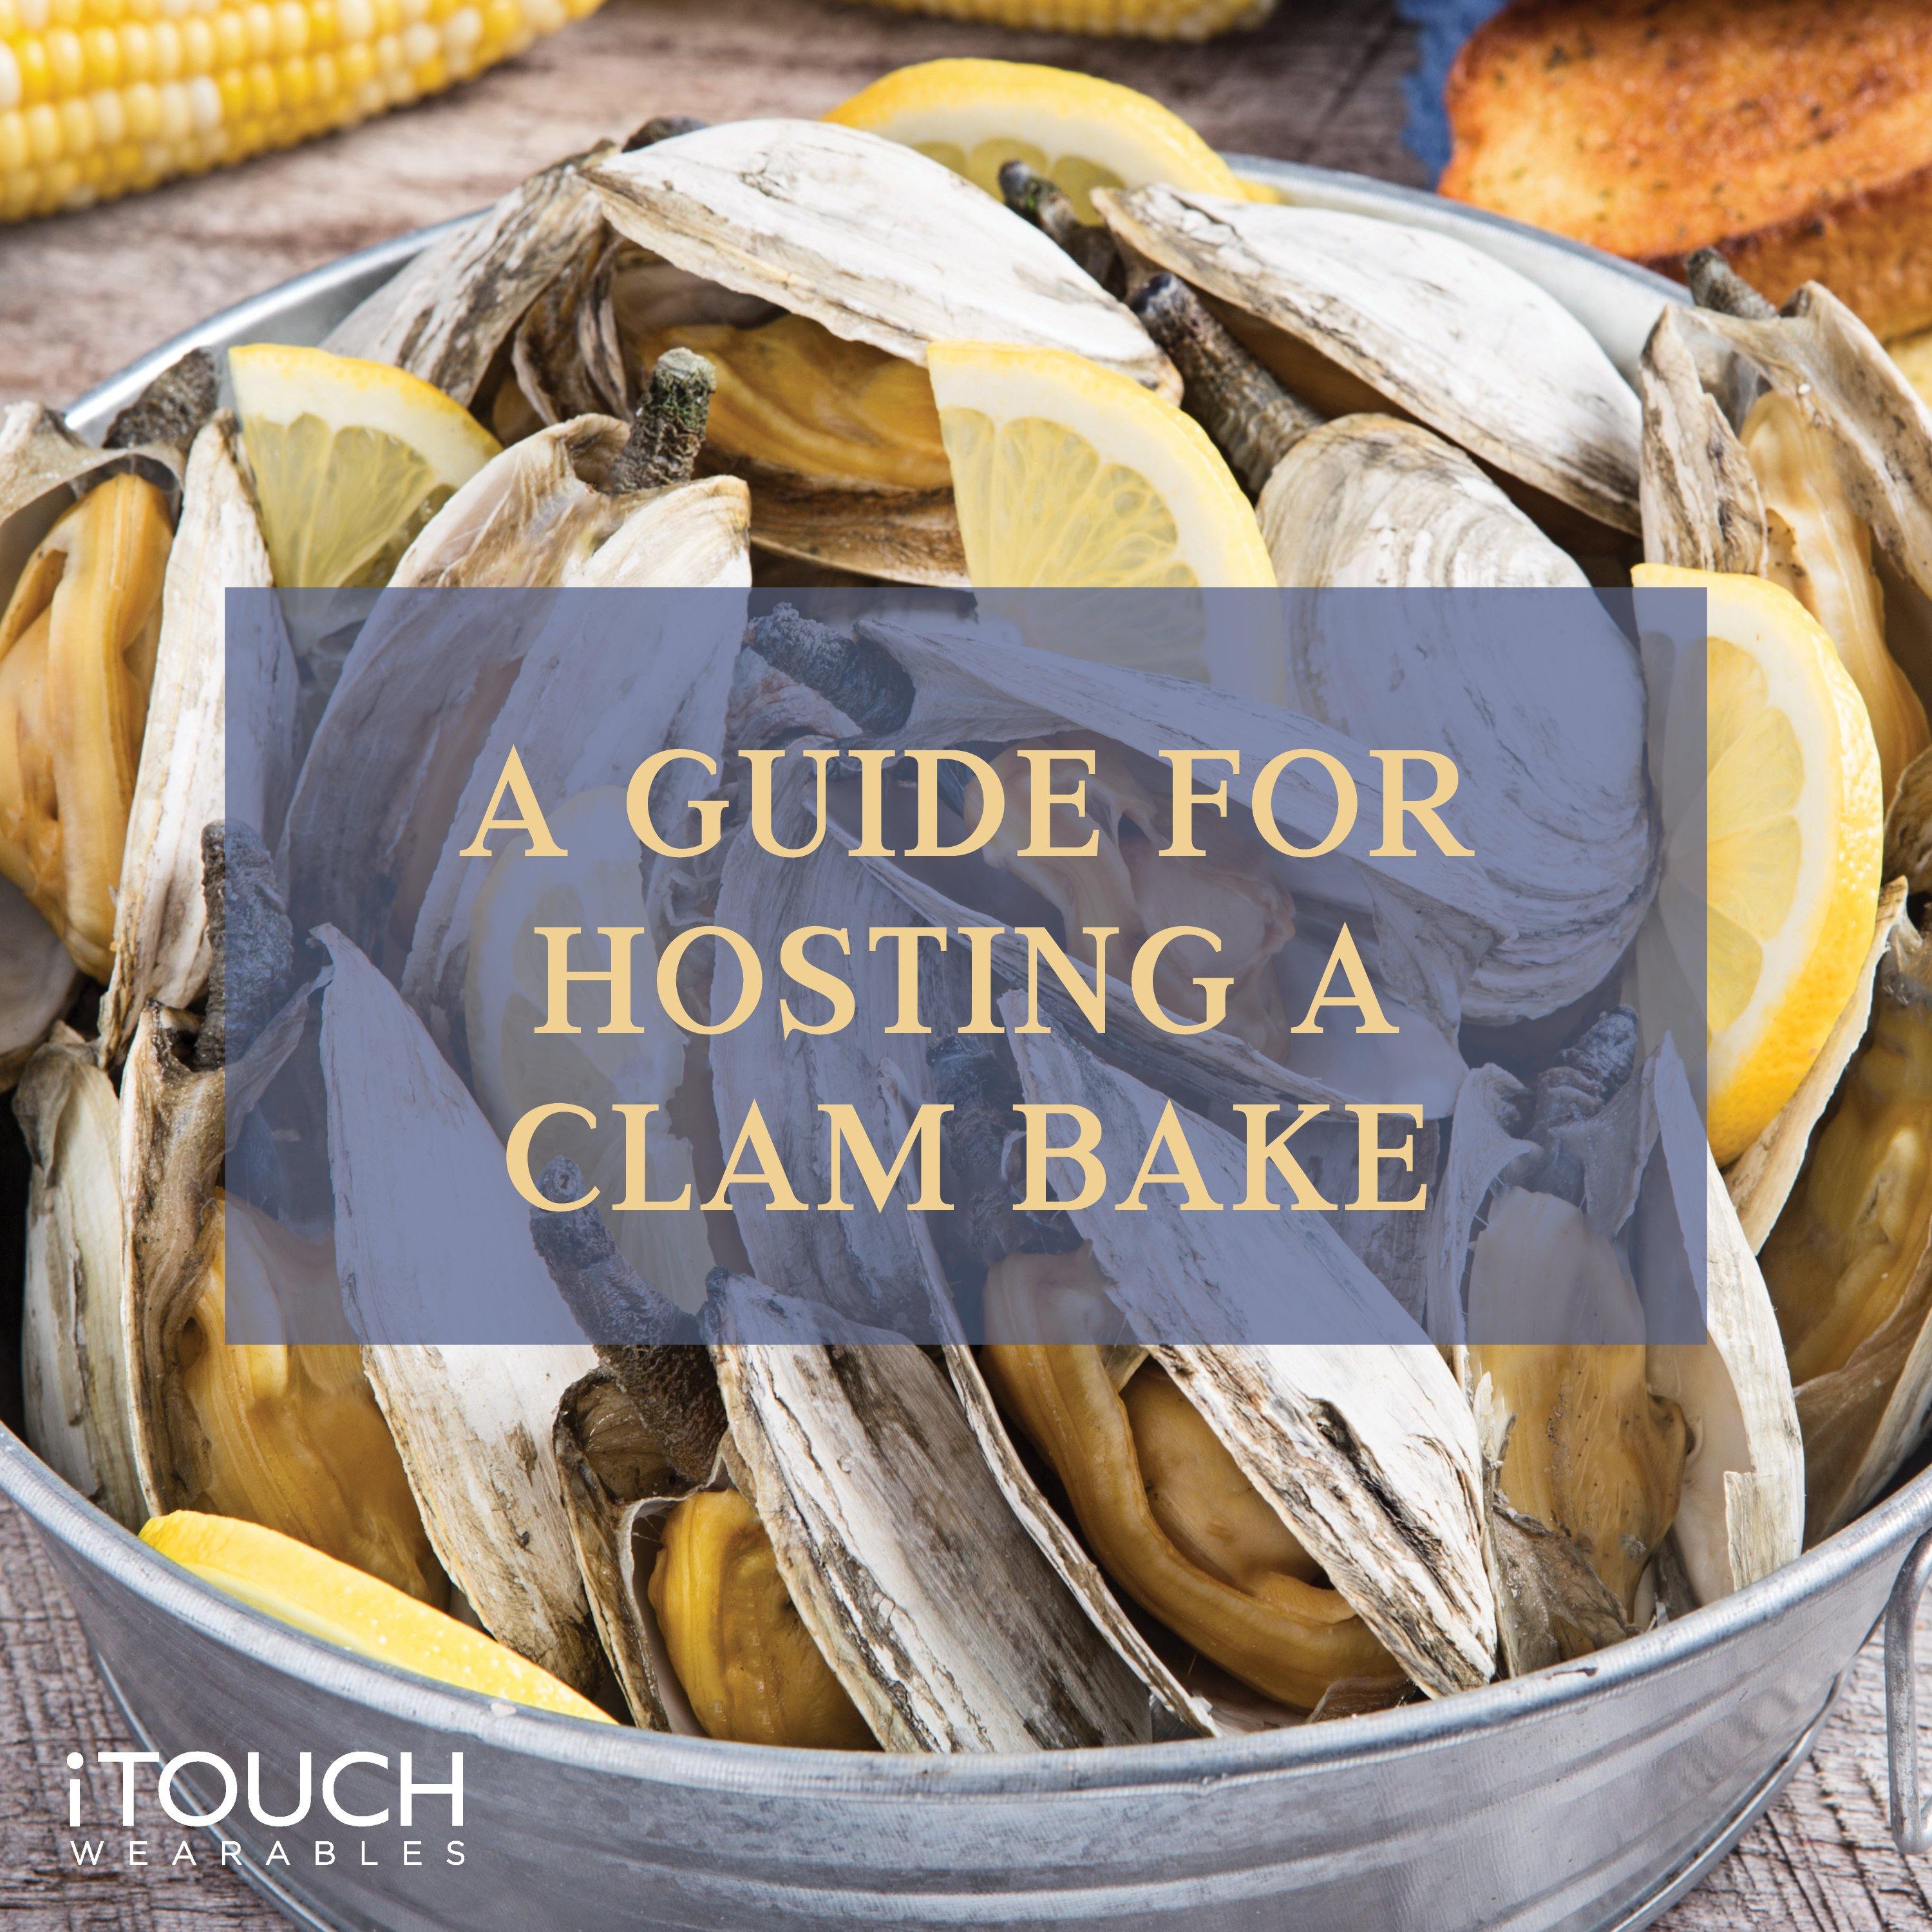 A Guide For Hosting A Clam Bake - iTOUCH Wearables